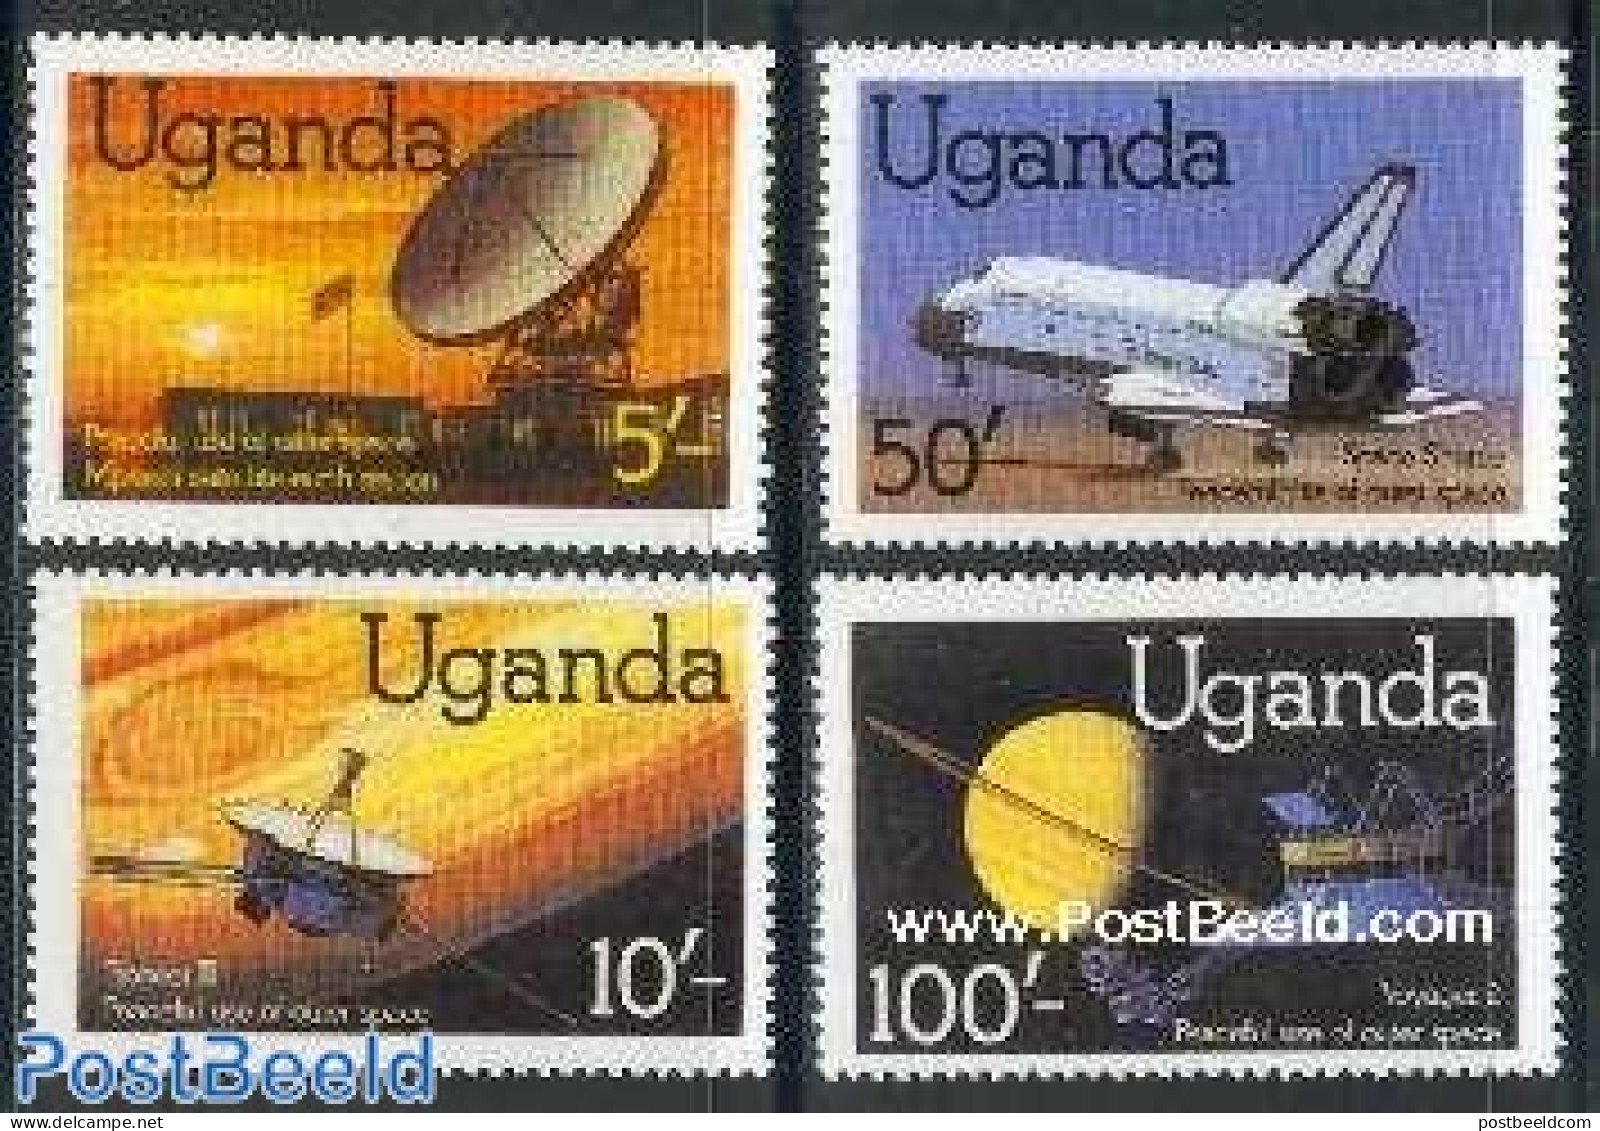 Uganda 1982 Peacefull Use Of Space 4v, Mint NH, Science - Transport - Astronomy - Telecommunication - Space Exploration - Astrology